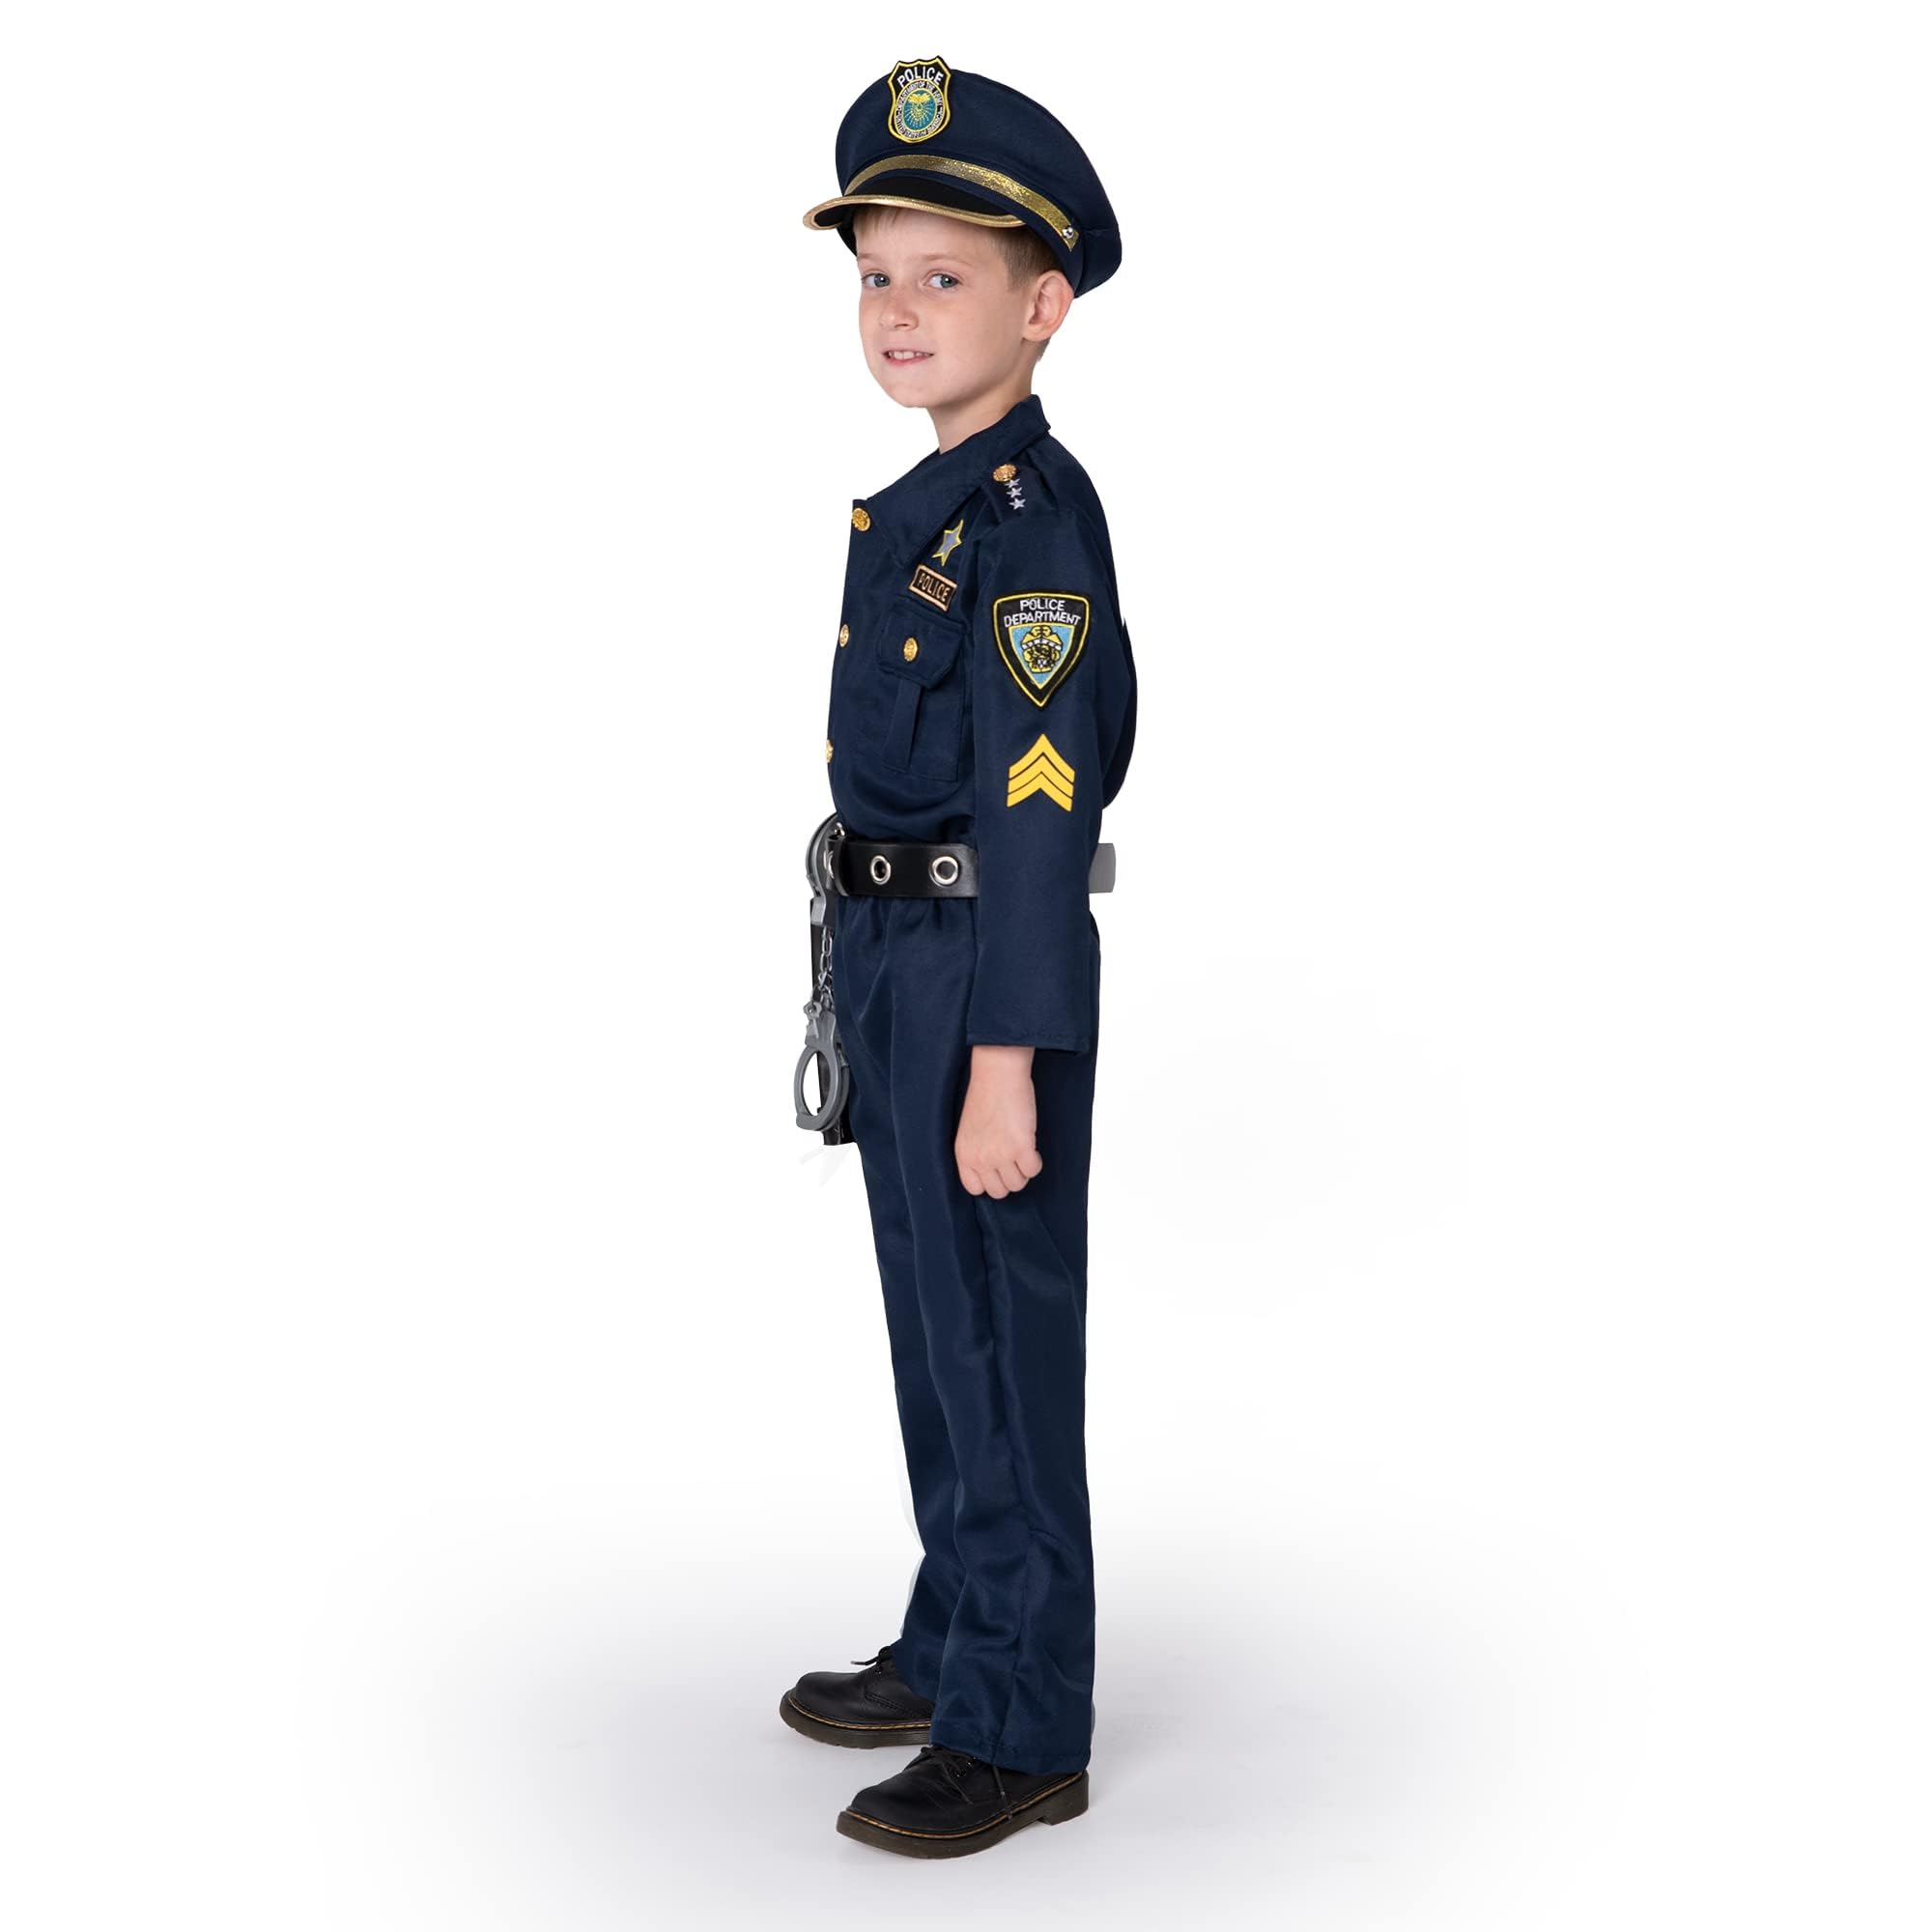 JOYIN Toy Deluxe Police Officer Costume and Role Play Kit for Kids Halloween Cosplay (Medium)